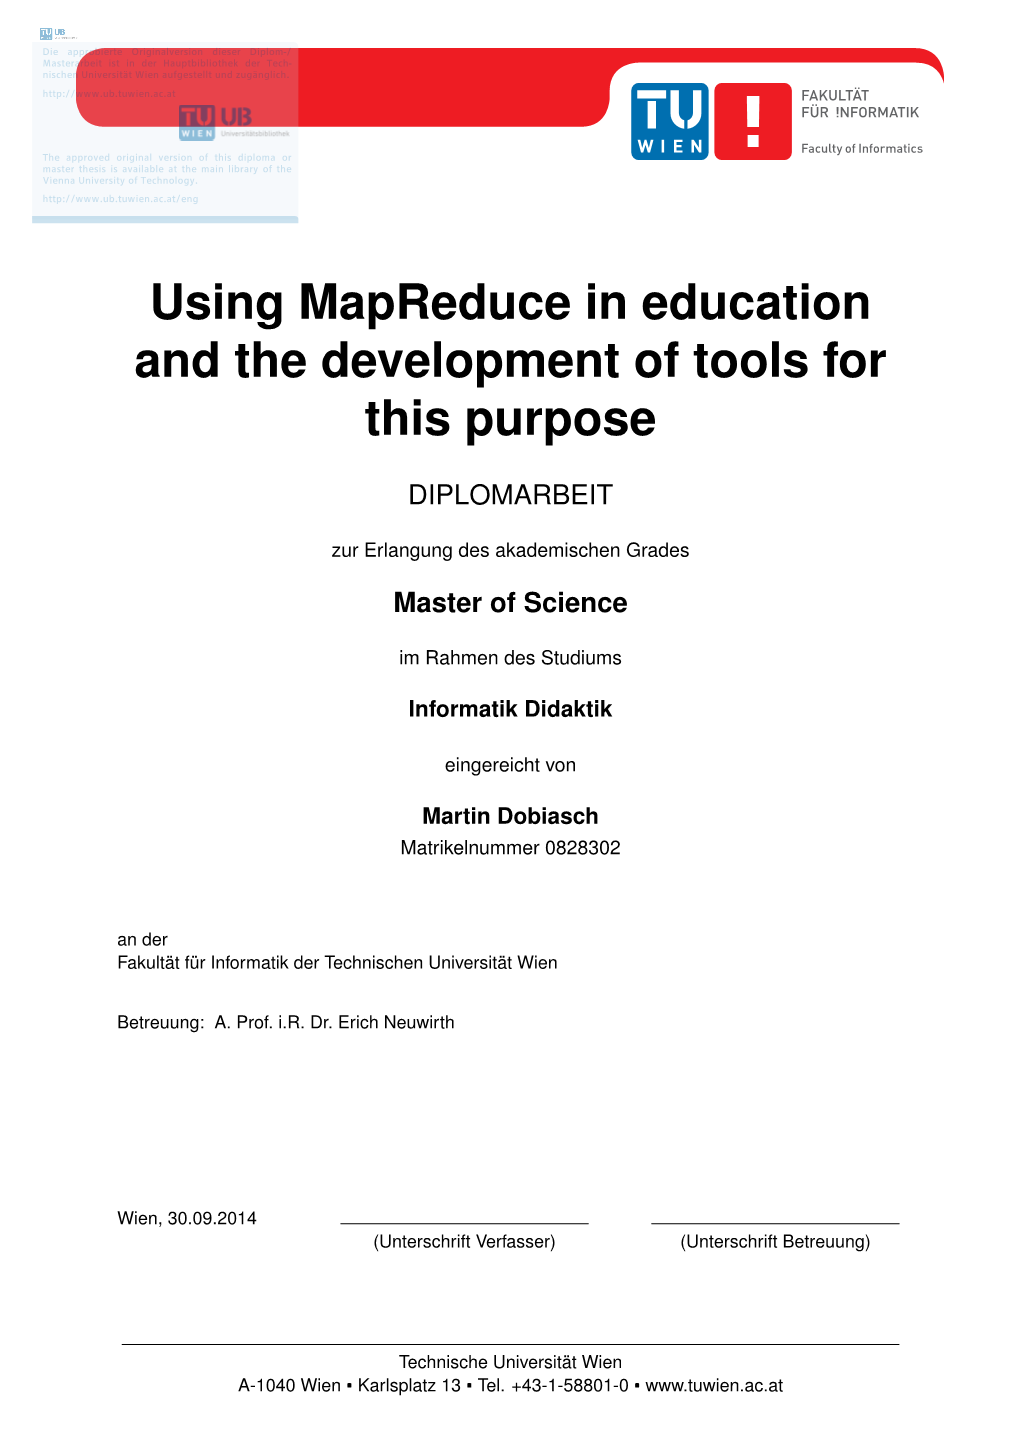 Using Mapreduce in Education and the Development of Tools for This Purpose